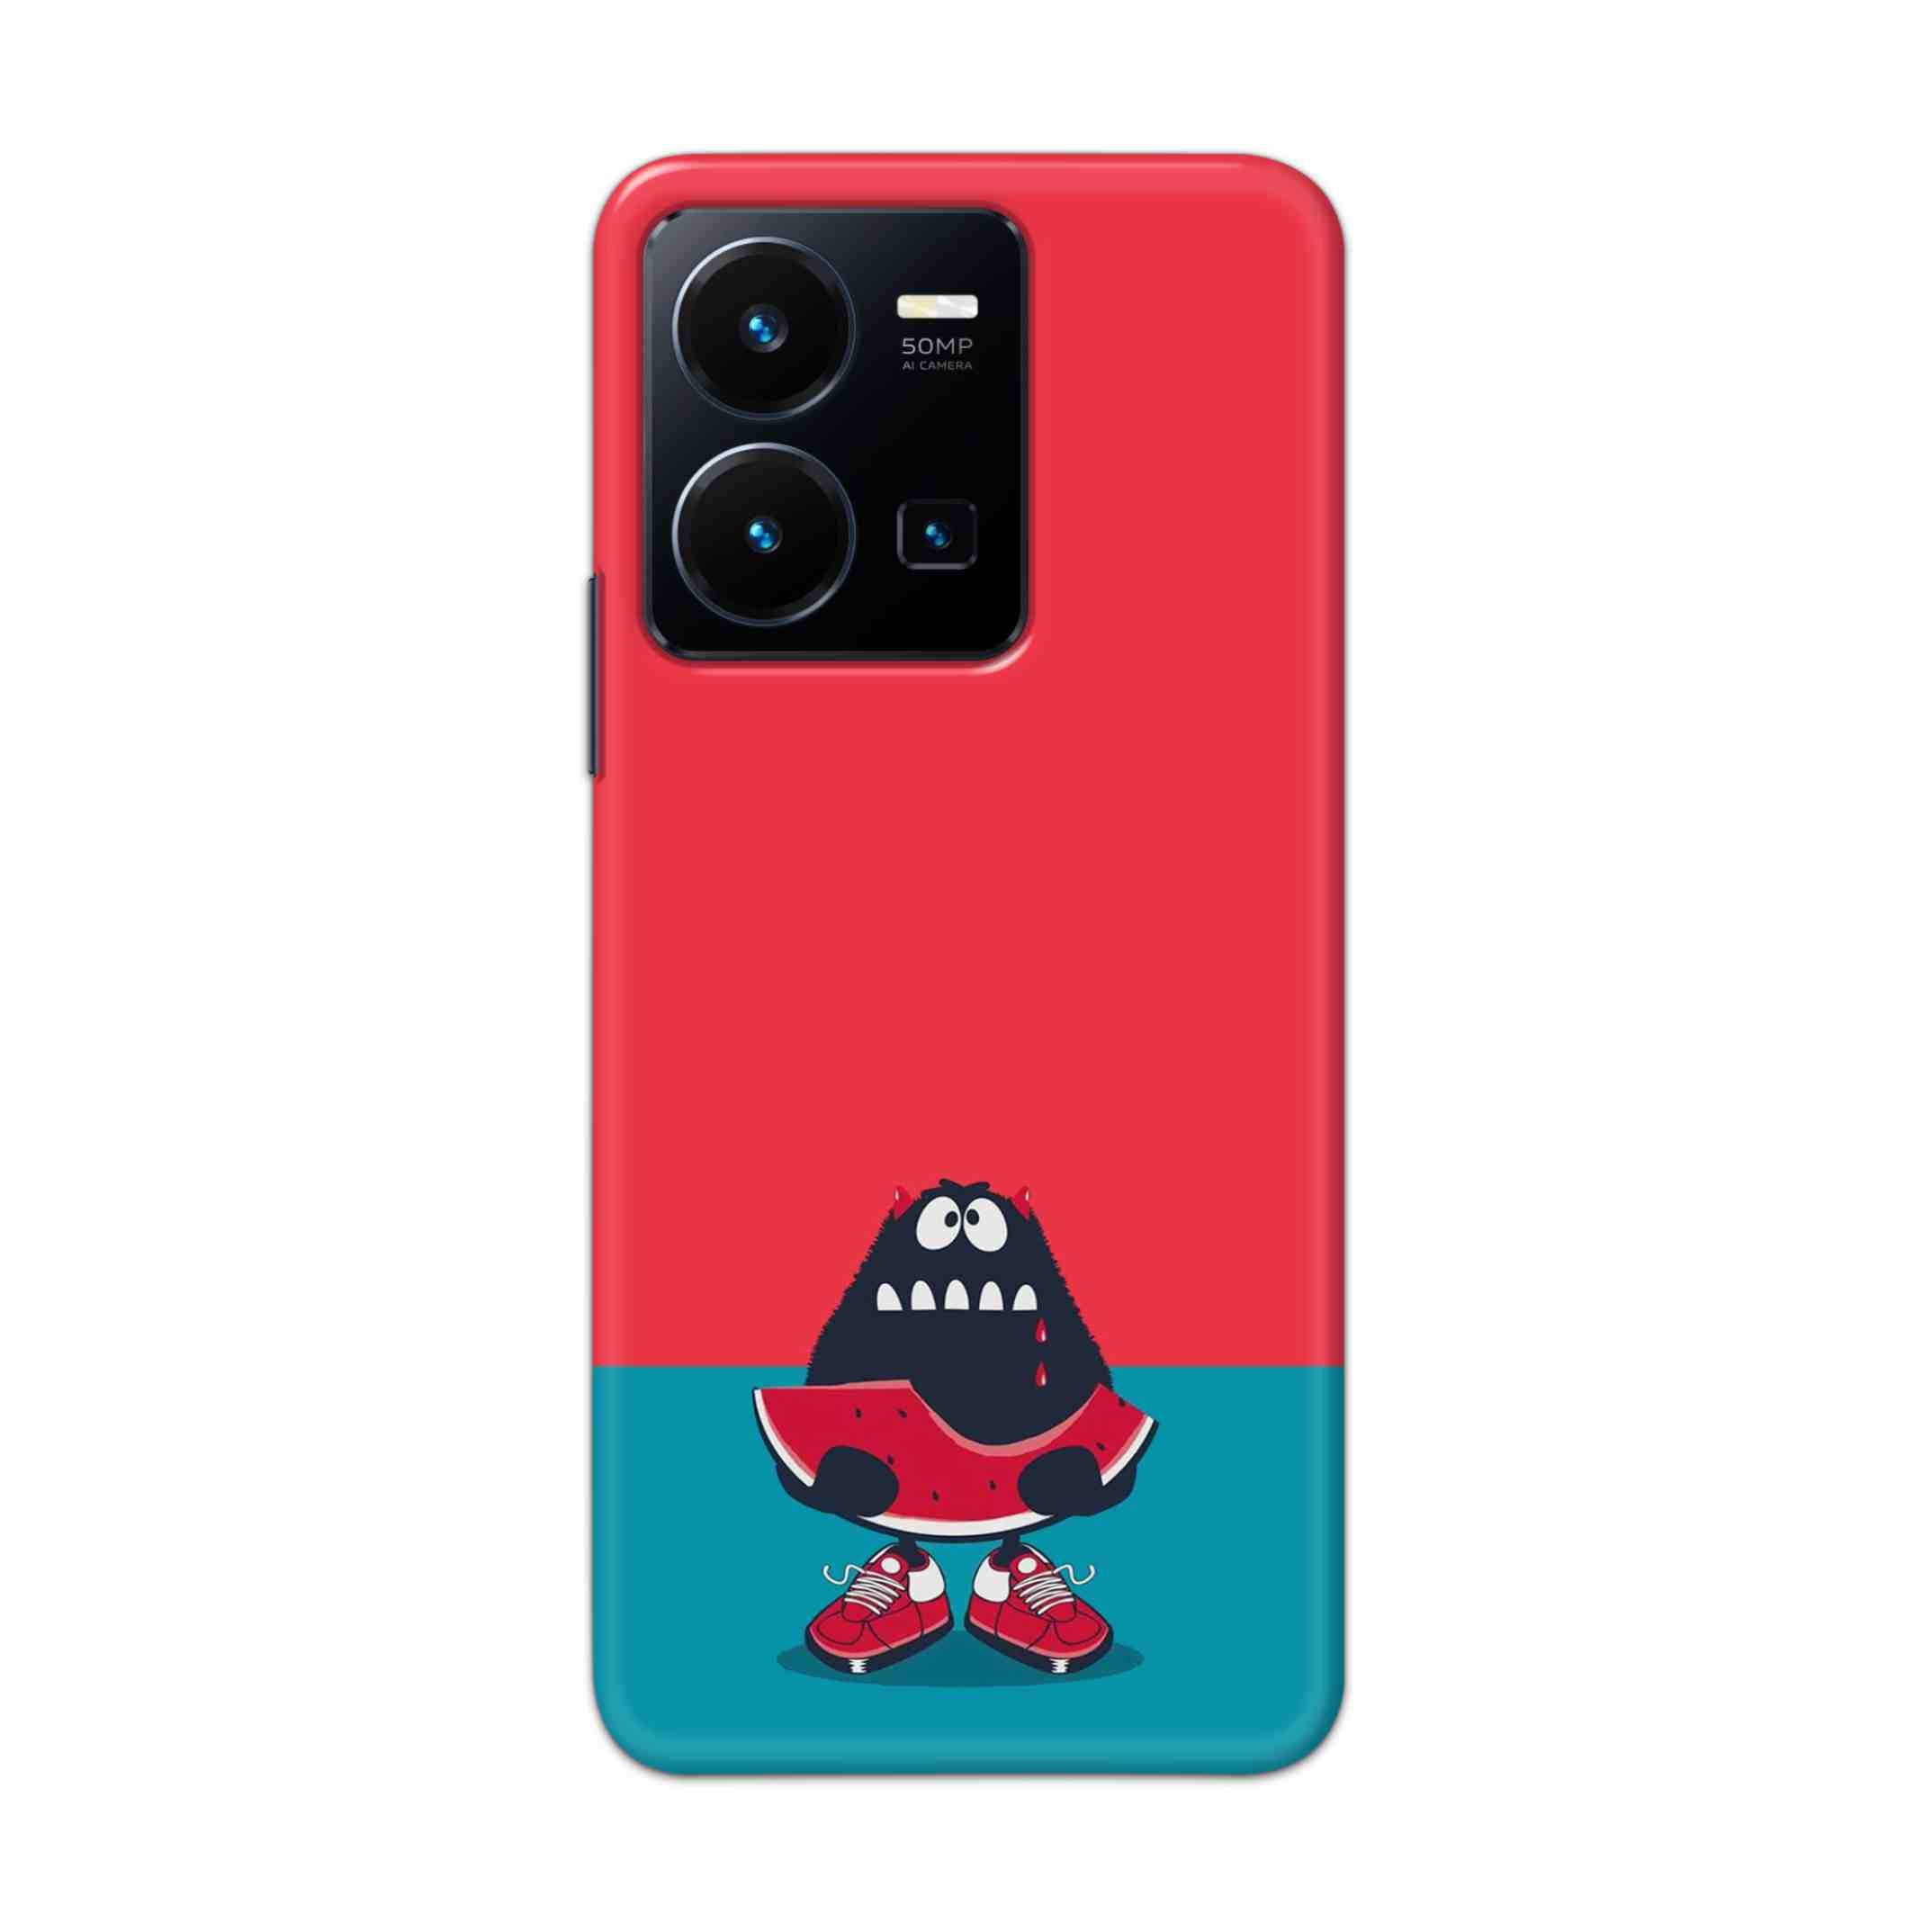 Buy Watermelon Hard Back Mobile Phone Case Cover For Vivo Y35 2022 Online